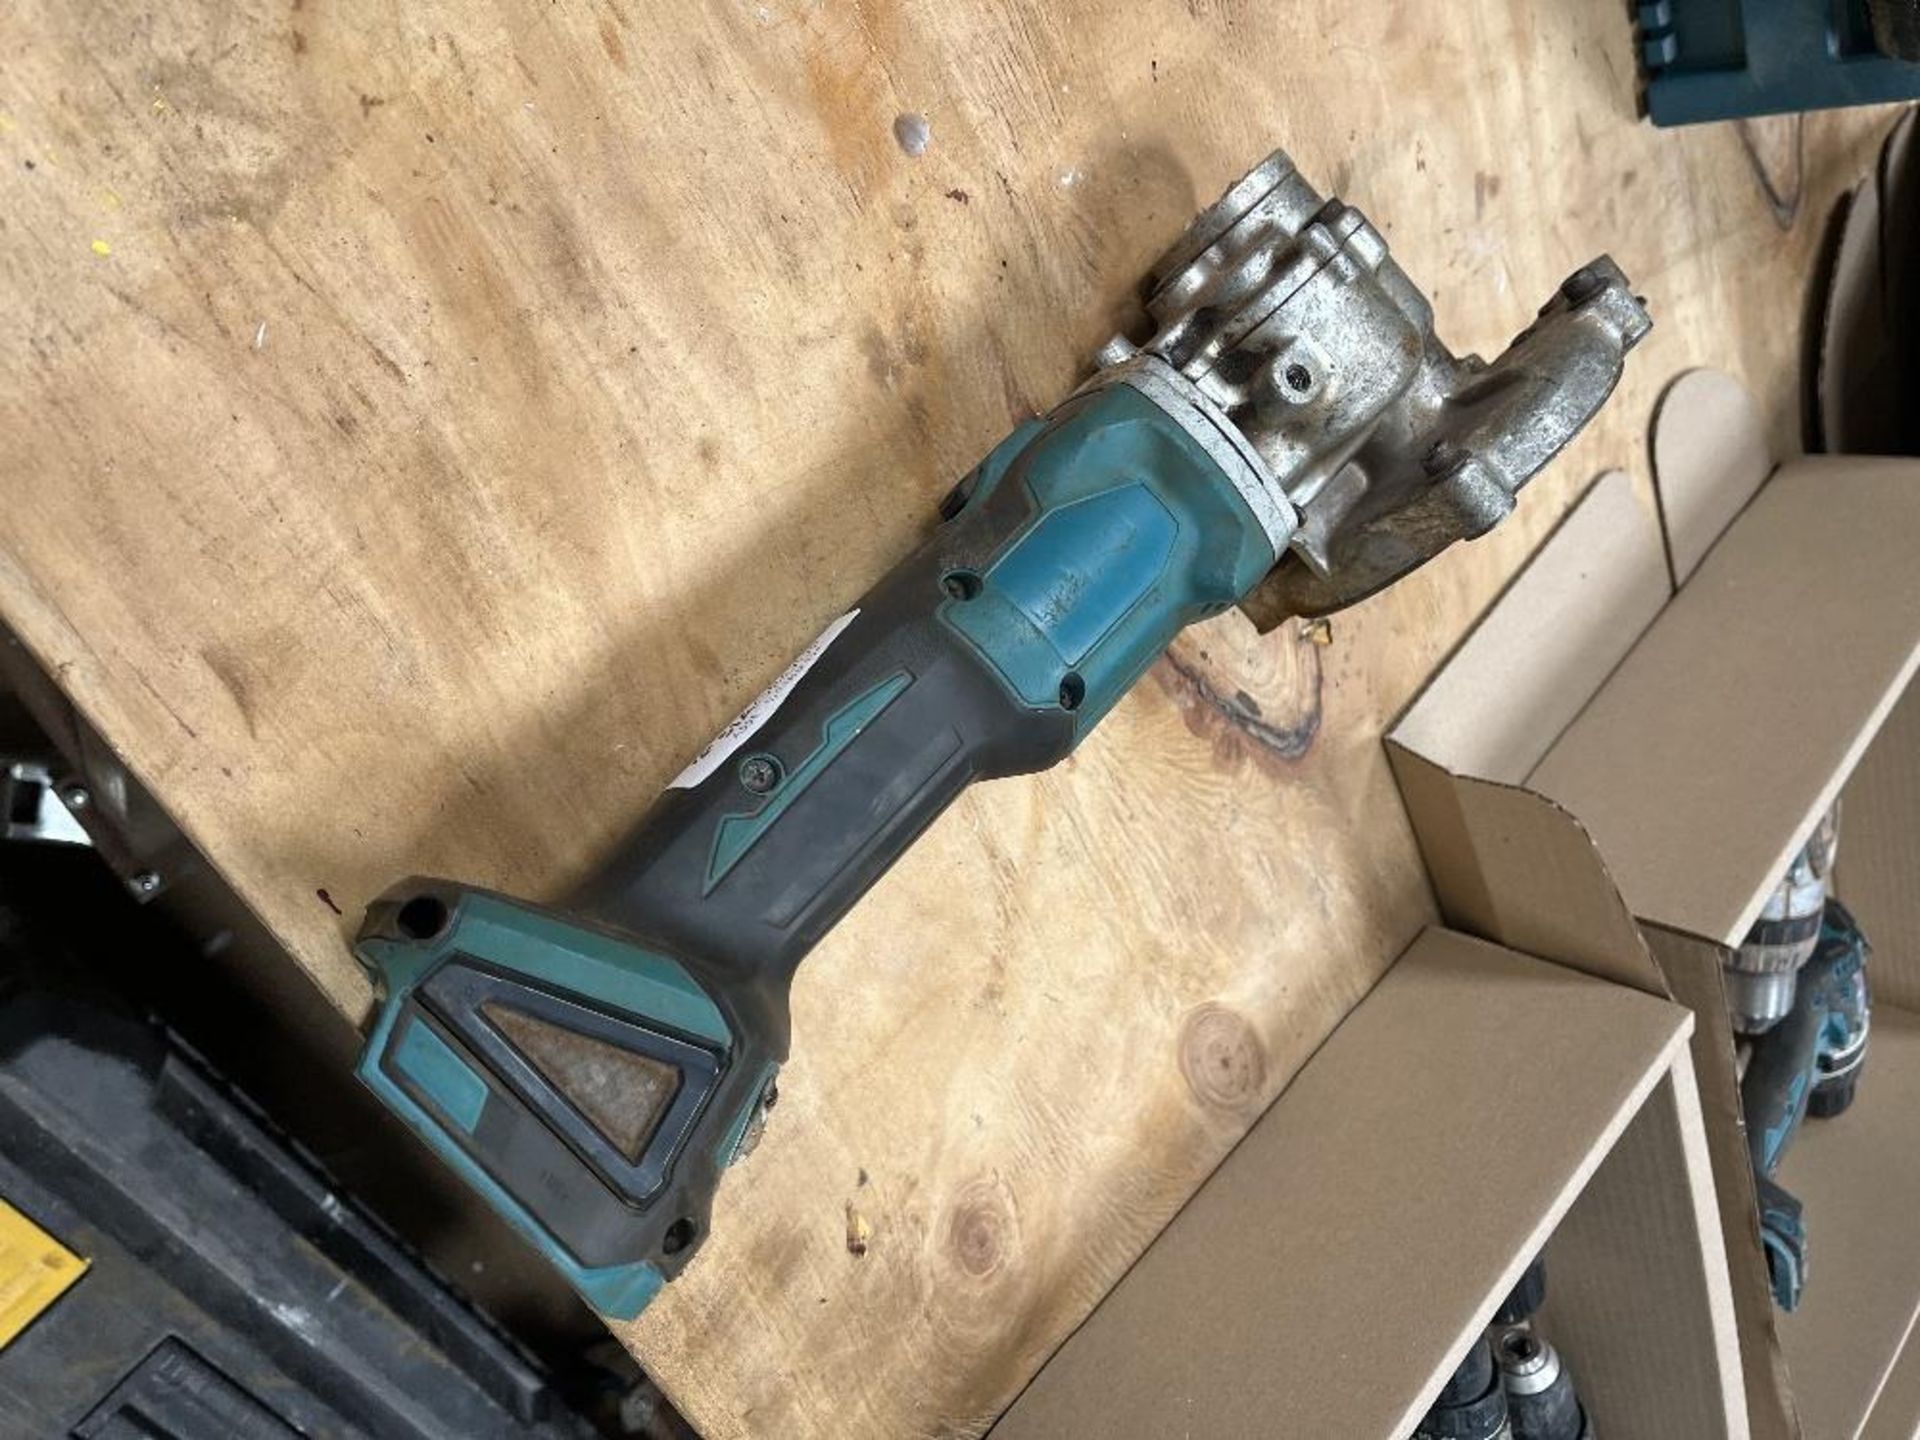 Makita battery angle grinder with bespoke head please note no battery or charger - Image 3 of 3